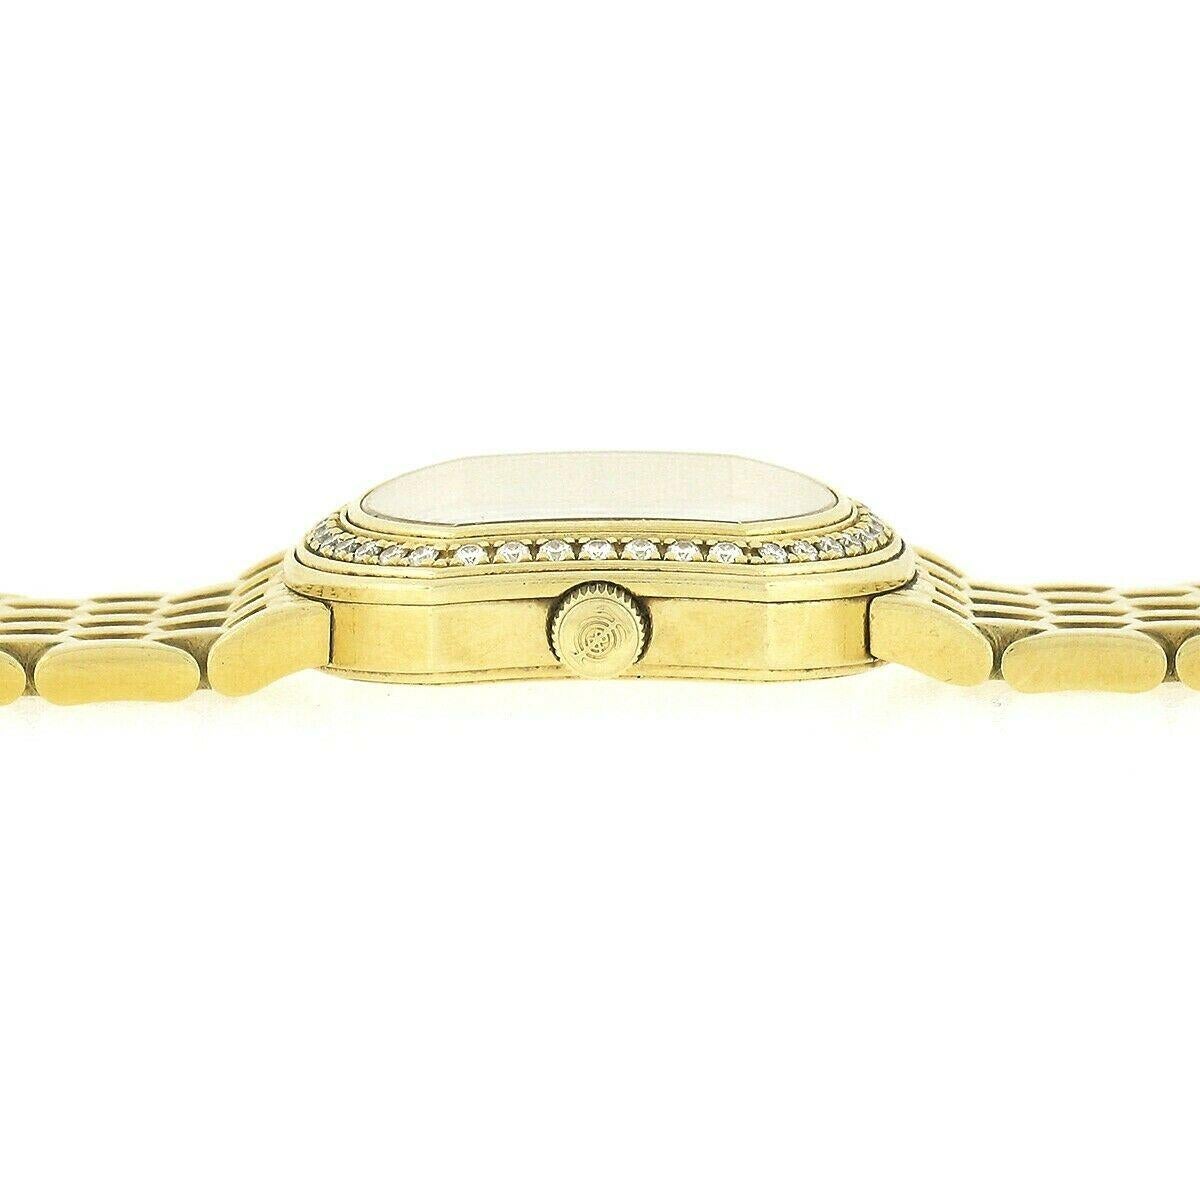 Tiffany & Co. Mark Coupe Resonator 18k Gold Ladies Watch 40pt Diamond Bezel In Good Condition For Sale In Montclair, NJ